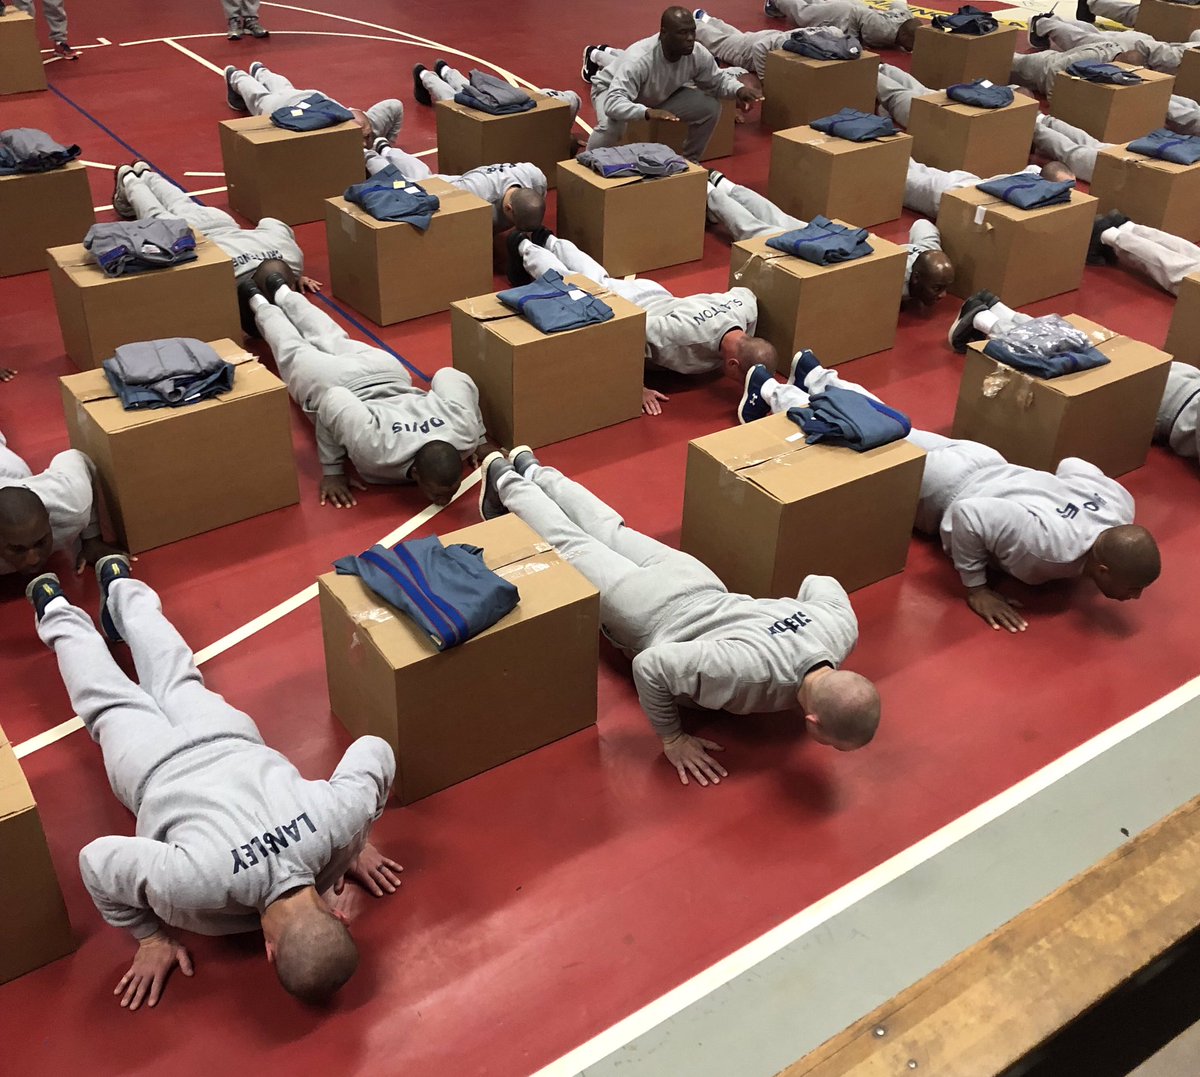 Class 63 received their brand new uniforms all boxed up. They had to do a few push ups before they could open their box 😂😂 but it was all for good morale and a great job they have been doing. Keep it up #63.#PursueTheCall #becomeatrooper